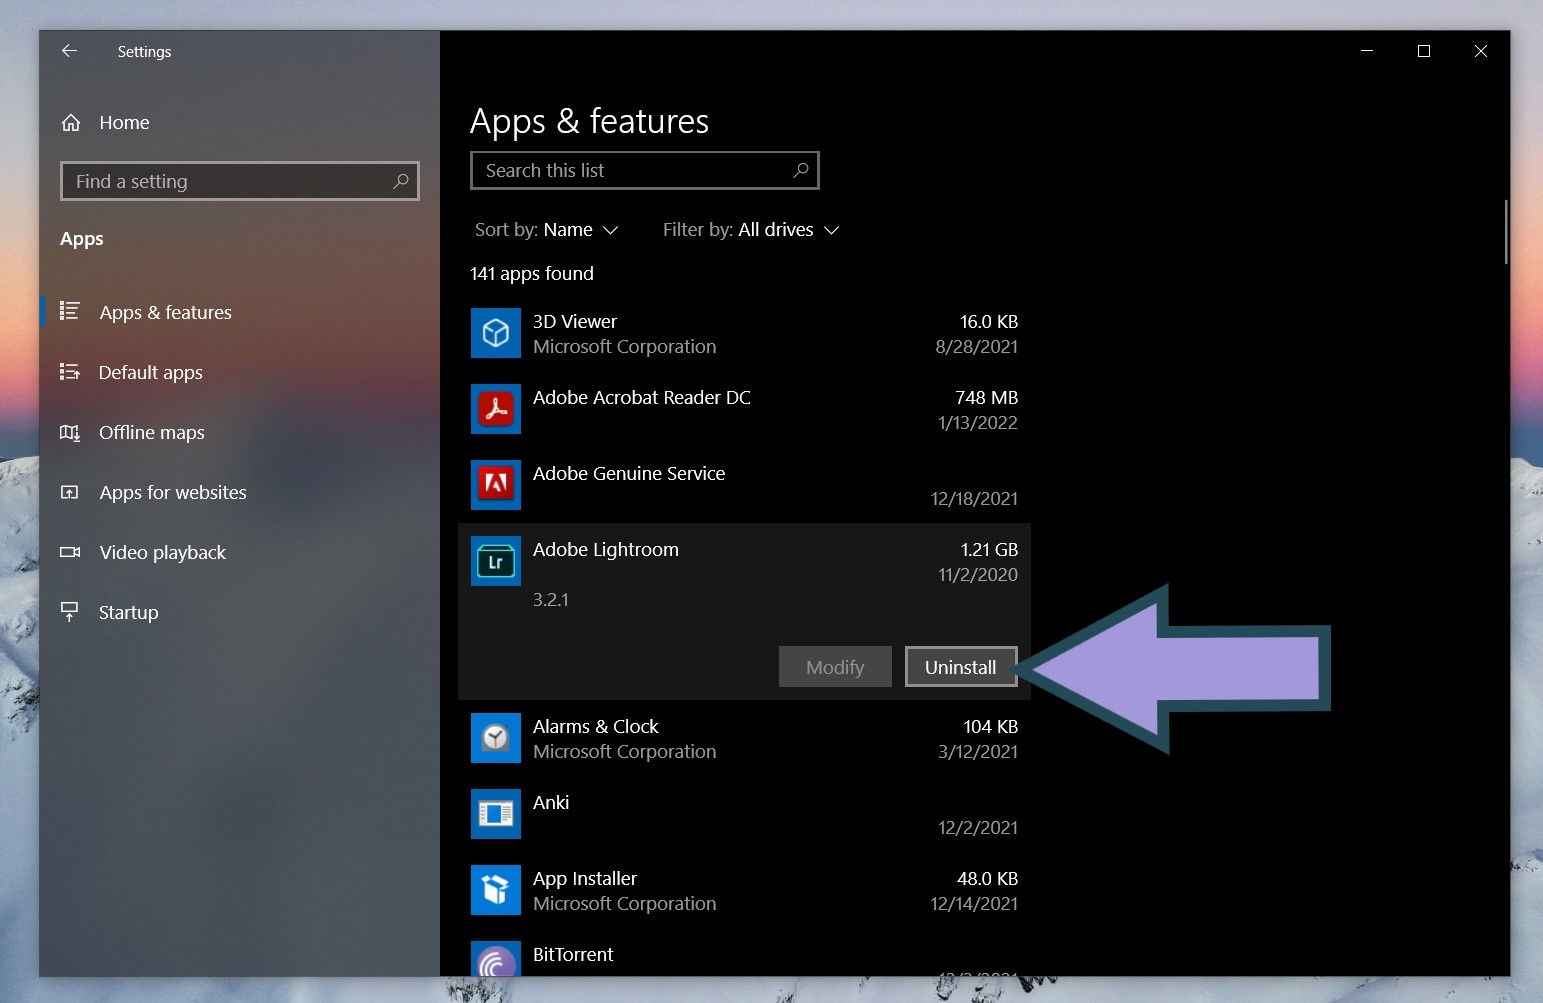 uninstall button on windows apps and features